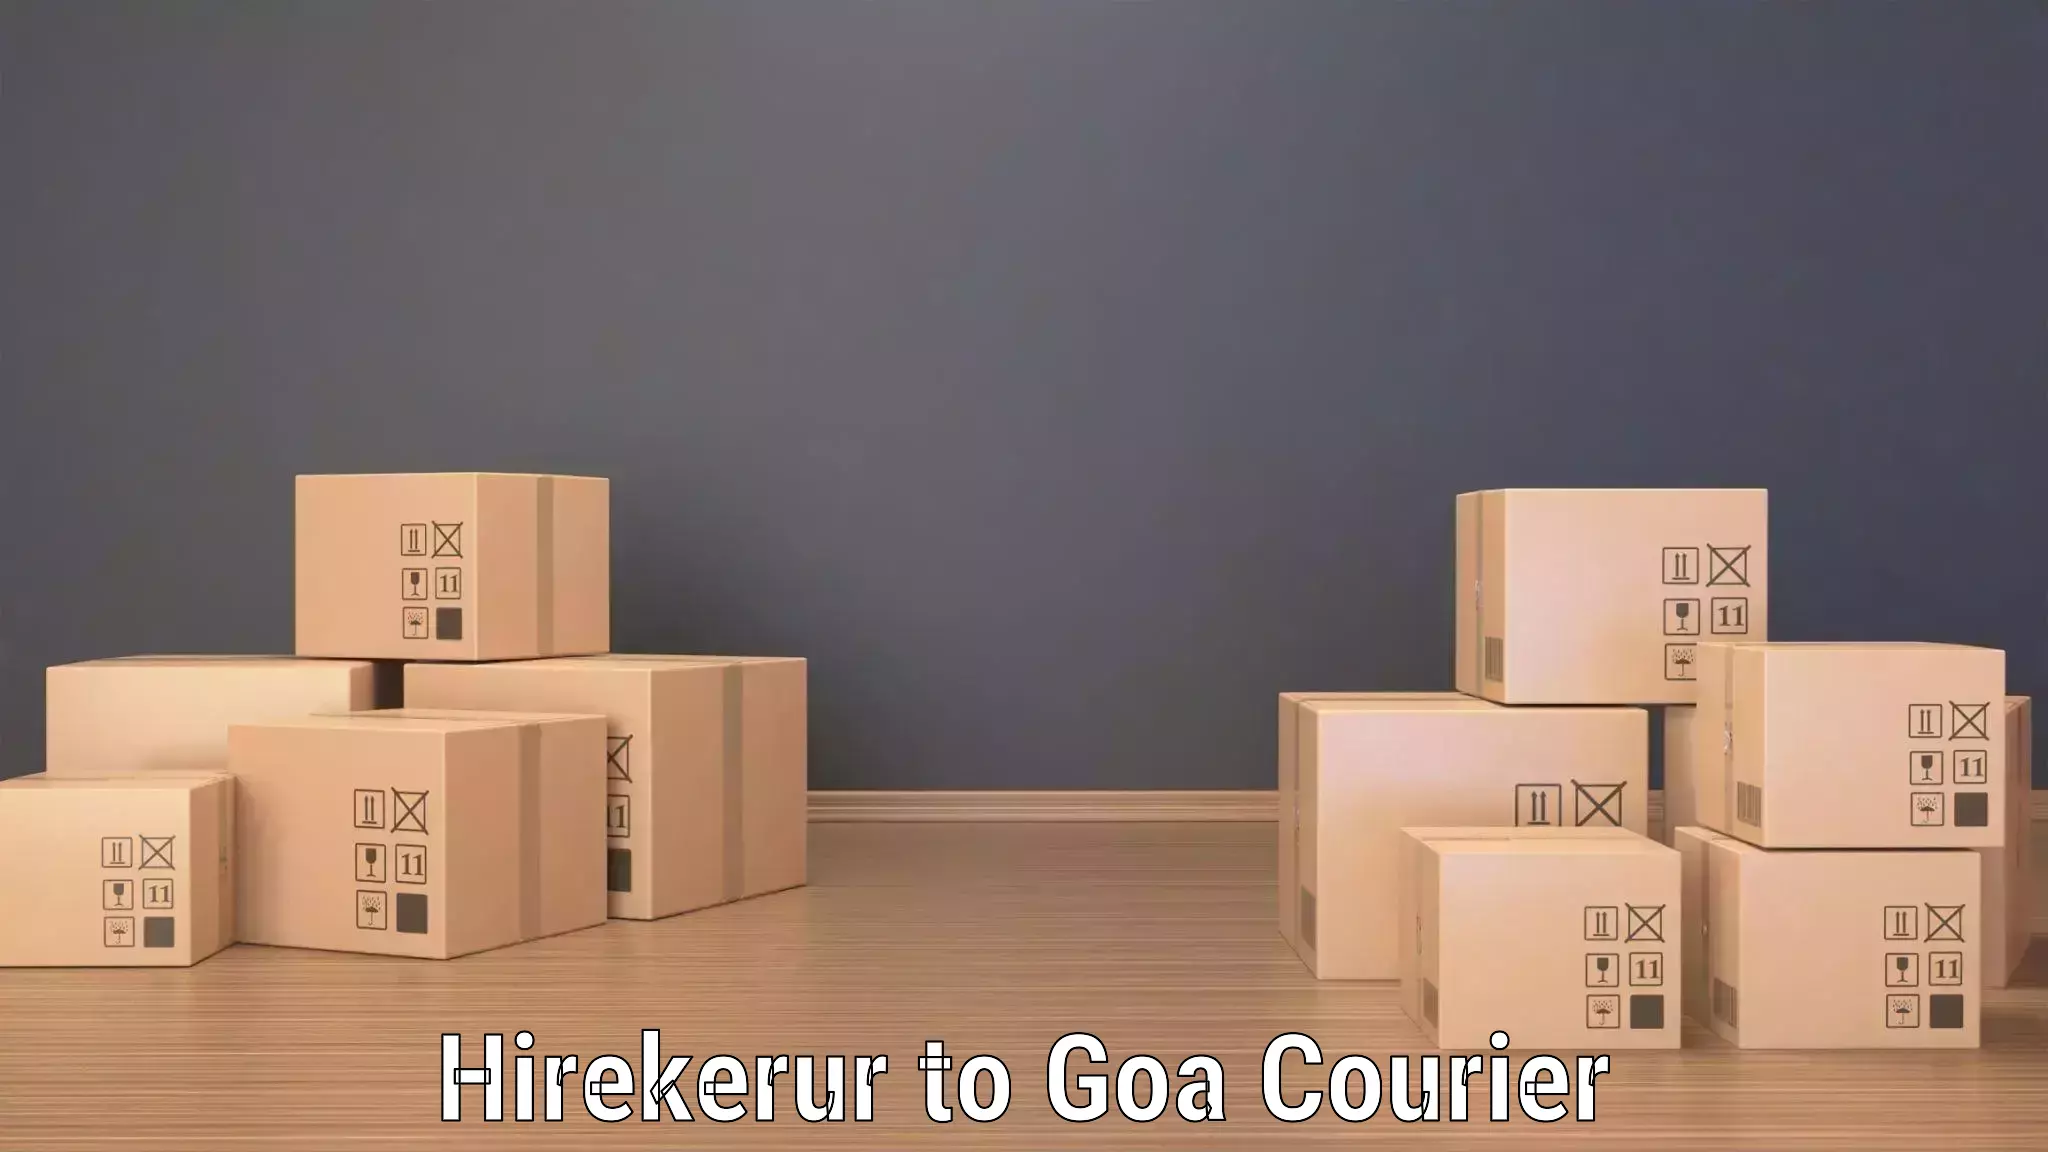 24/7 courier service in Hirekerur to Margao